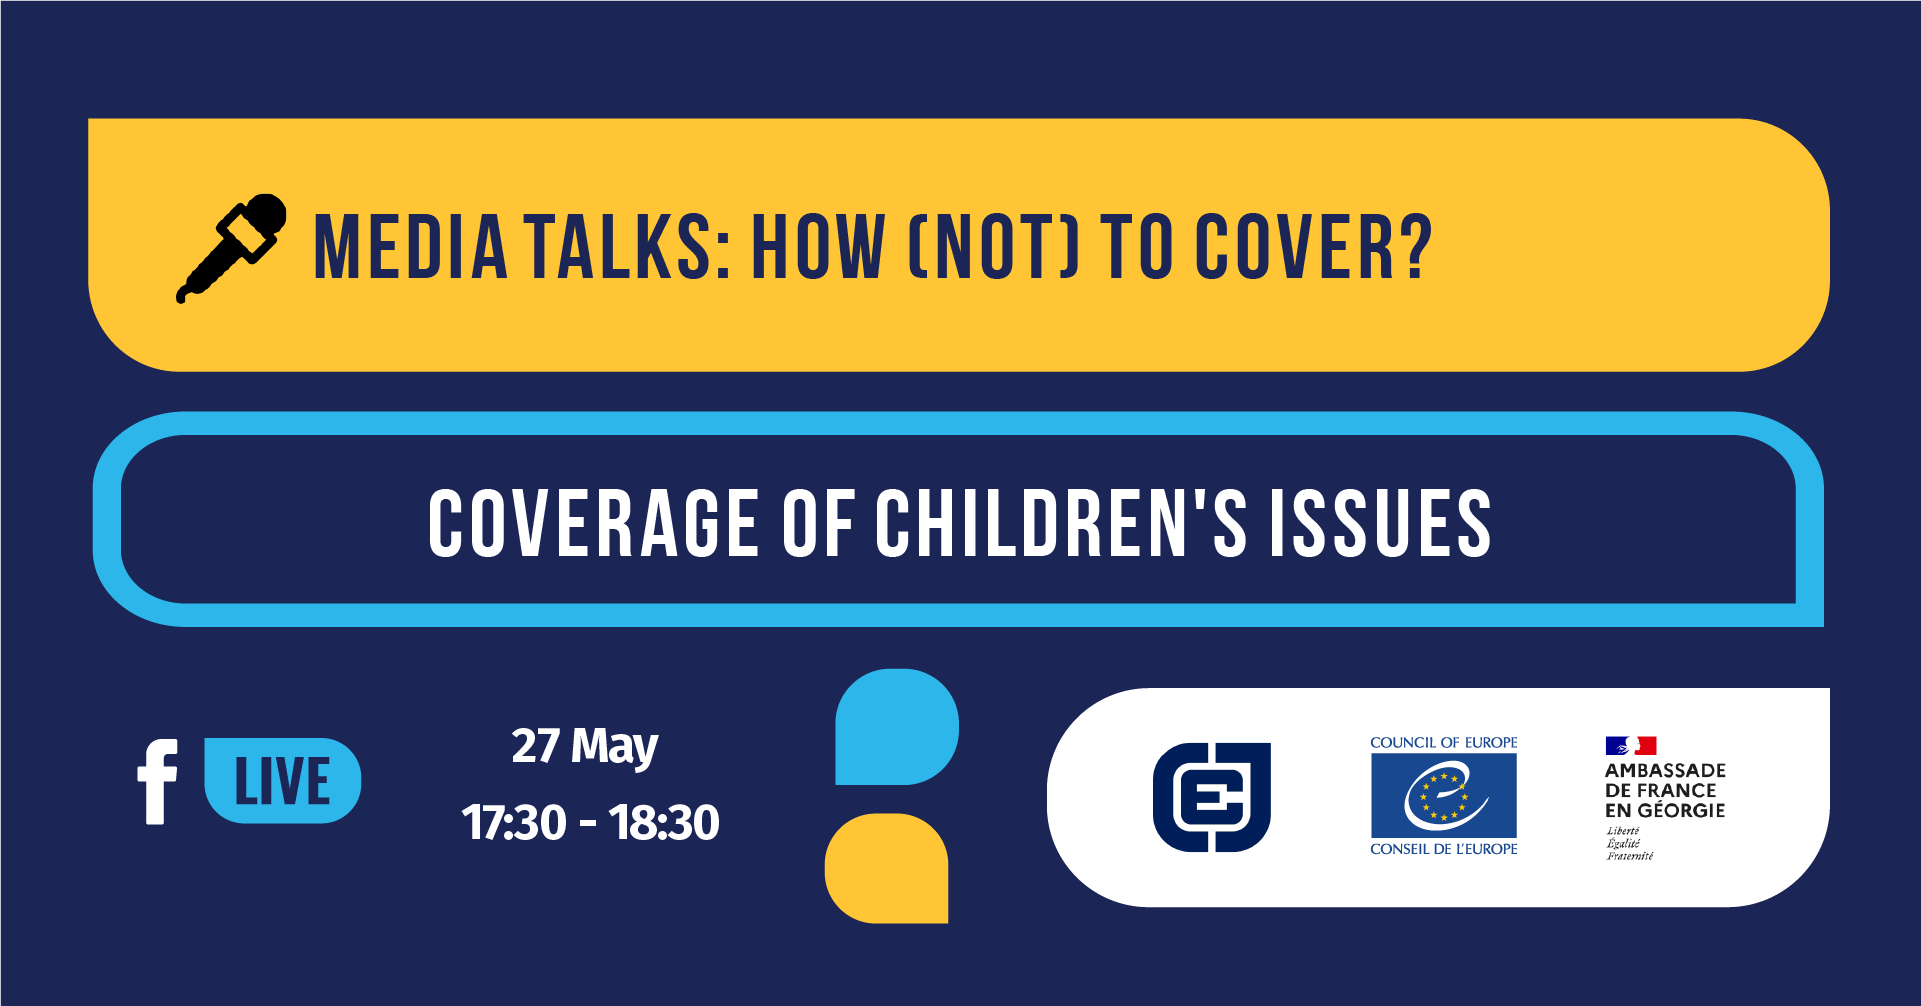 The kick off of the series of Media Talks: How (not) to cover